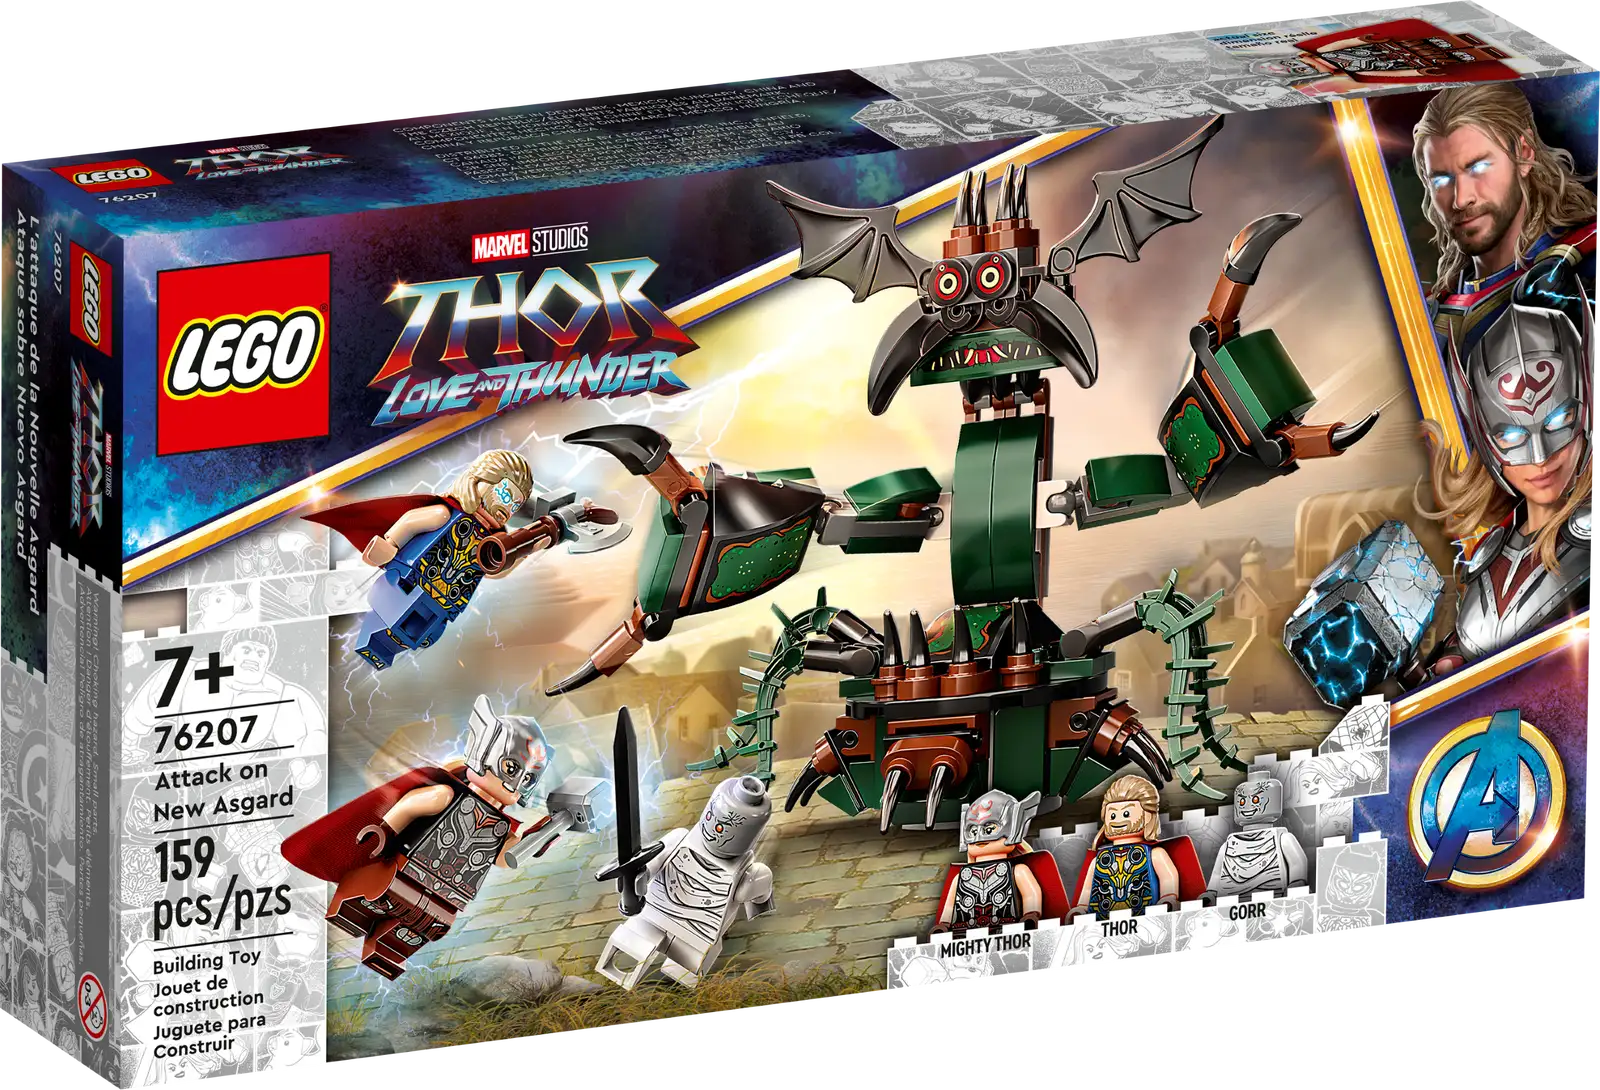 Give Super Heroes aged 7 and up a monster treat with LEGO® Marvel Attack on New Asgard (76207). This stand-out action playset from the Marvel Studios’ Thor: Love and Thunder movie pitches the heroes against a creature built out of kids’ imaginations. A must-have monster playset for Thor fans Kids can take on everyone’s worst nightmare with this mega-monster, Super-Hero playset. The buildable toy includes 3 popular minifigures: Gorr, who summons the Shadow Monster to life; Thor, swinging his Stormbreaker axe; and Mighty Thor, carrying the Mjölnir hammer. The towering monster has jointed arms and claws to maximize both play and display possibilities. For extra construction fun, the free LEGO Building Instructions app contains intuitive, digital visualization tools, including zoom and rotate. Super-Hero monster battles – With LEGO® Marvel Attack on New Asgard (76207), kids can be part of the Marvel Studios’ Thor: Love and Thunder movie action Iconic Marvel characters – Includes Thor, Mighty Thor and Gorr minifigures, plus a buildable Shadow Monster with jointed arms and claws for imaginative play and display Endless play possibilities – Kids recreate movie scenes and play out adventures of their own as they battle the twisting, turning, grabbing, nipping Shadow Monster Gift for kids – Put Marvel action into the hands of Thor fans aged 7 and up, with this movie-based birthday or holiday gift Jointed for posability – Standing over 4 in. (11 cm) tall, the posable Shadow Monster inspires endless imaginative role play and can be put on display when the day’s battles are over Interactive digital building – Using the LEGO® Building Instructions app, kids can zoom, rotate and visualize a digital version of their model as they build Creative play – All LEGO® Marvel building toys provide young Super Heroes with premium-quality playsets designed to deliver endless imaginative play possibilities Quality guaranteed – LEGO® components fulfill stringent industry quality standards to ensure they are consistent, compatible and connect and pull apart perfectly every time Safety assured – LEGO® components are dropped, heated, crushed, twisted and analyzed to make sure they satisfy rigorous global safety standards